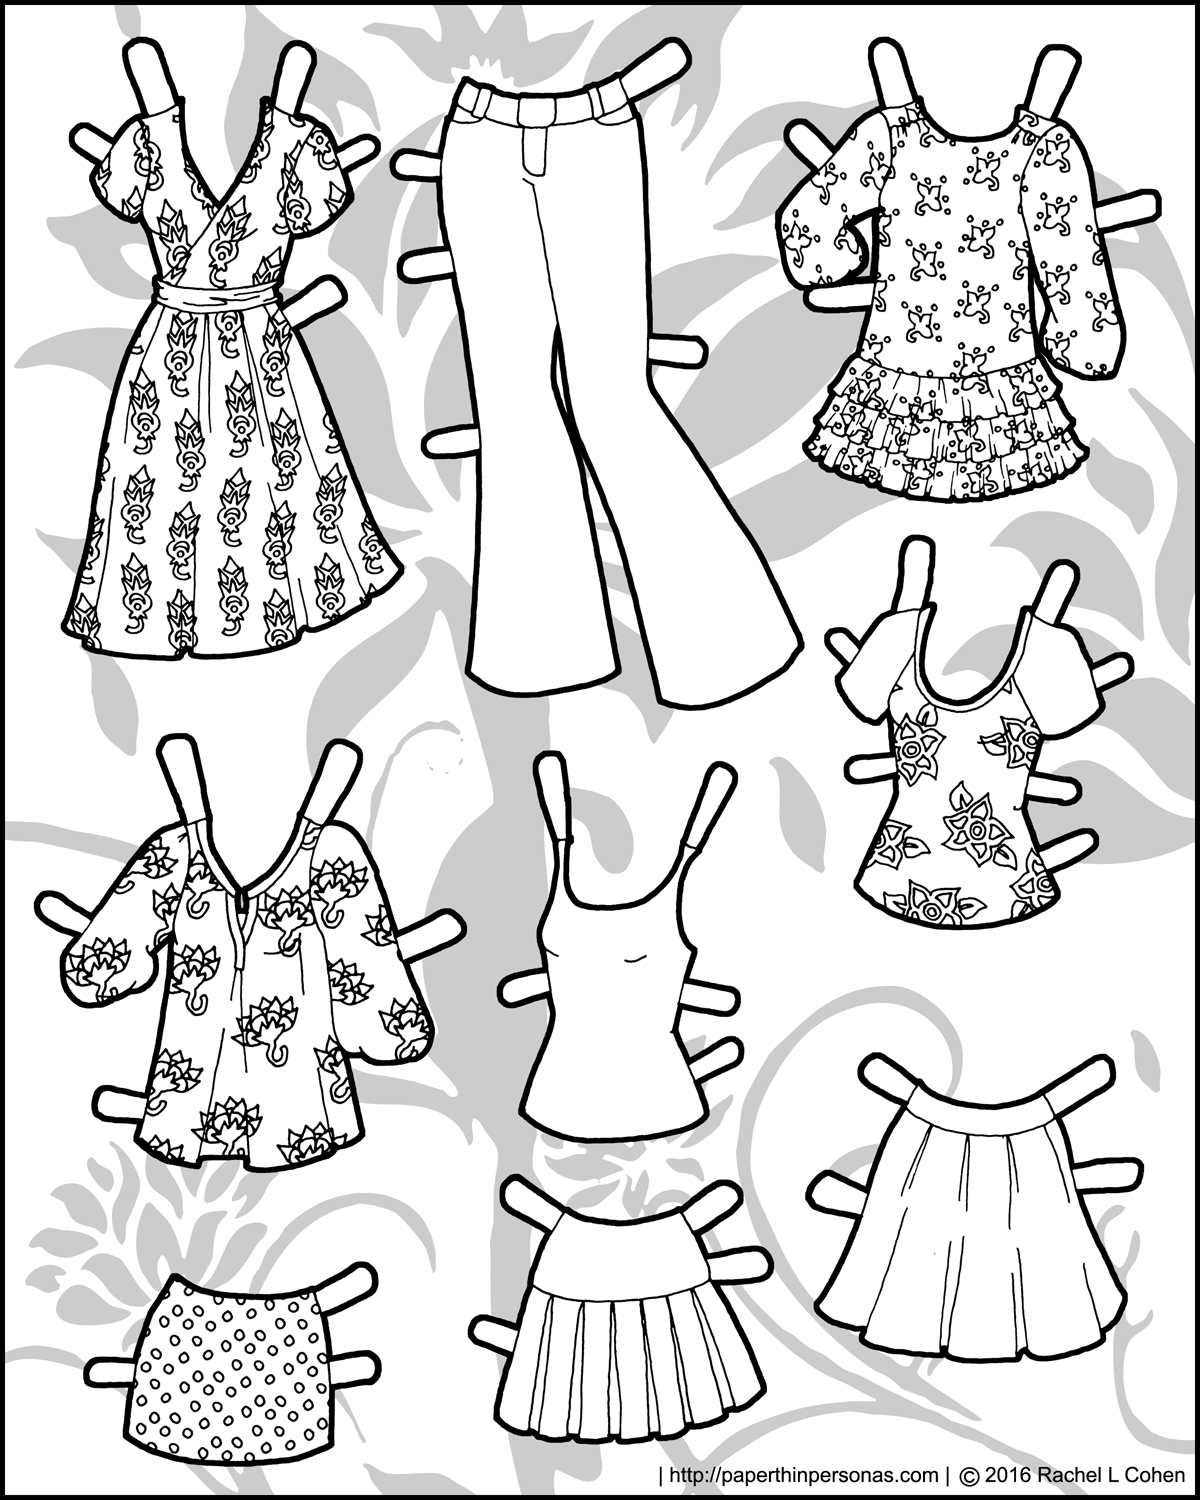 Ms mannequin in the summer paper doll clothing â paper thin personas